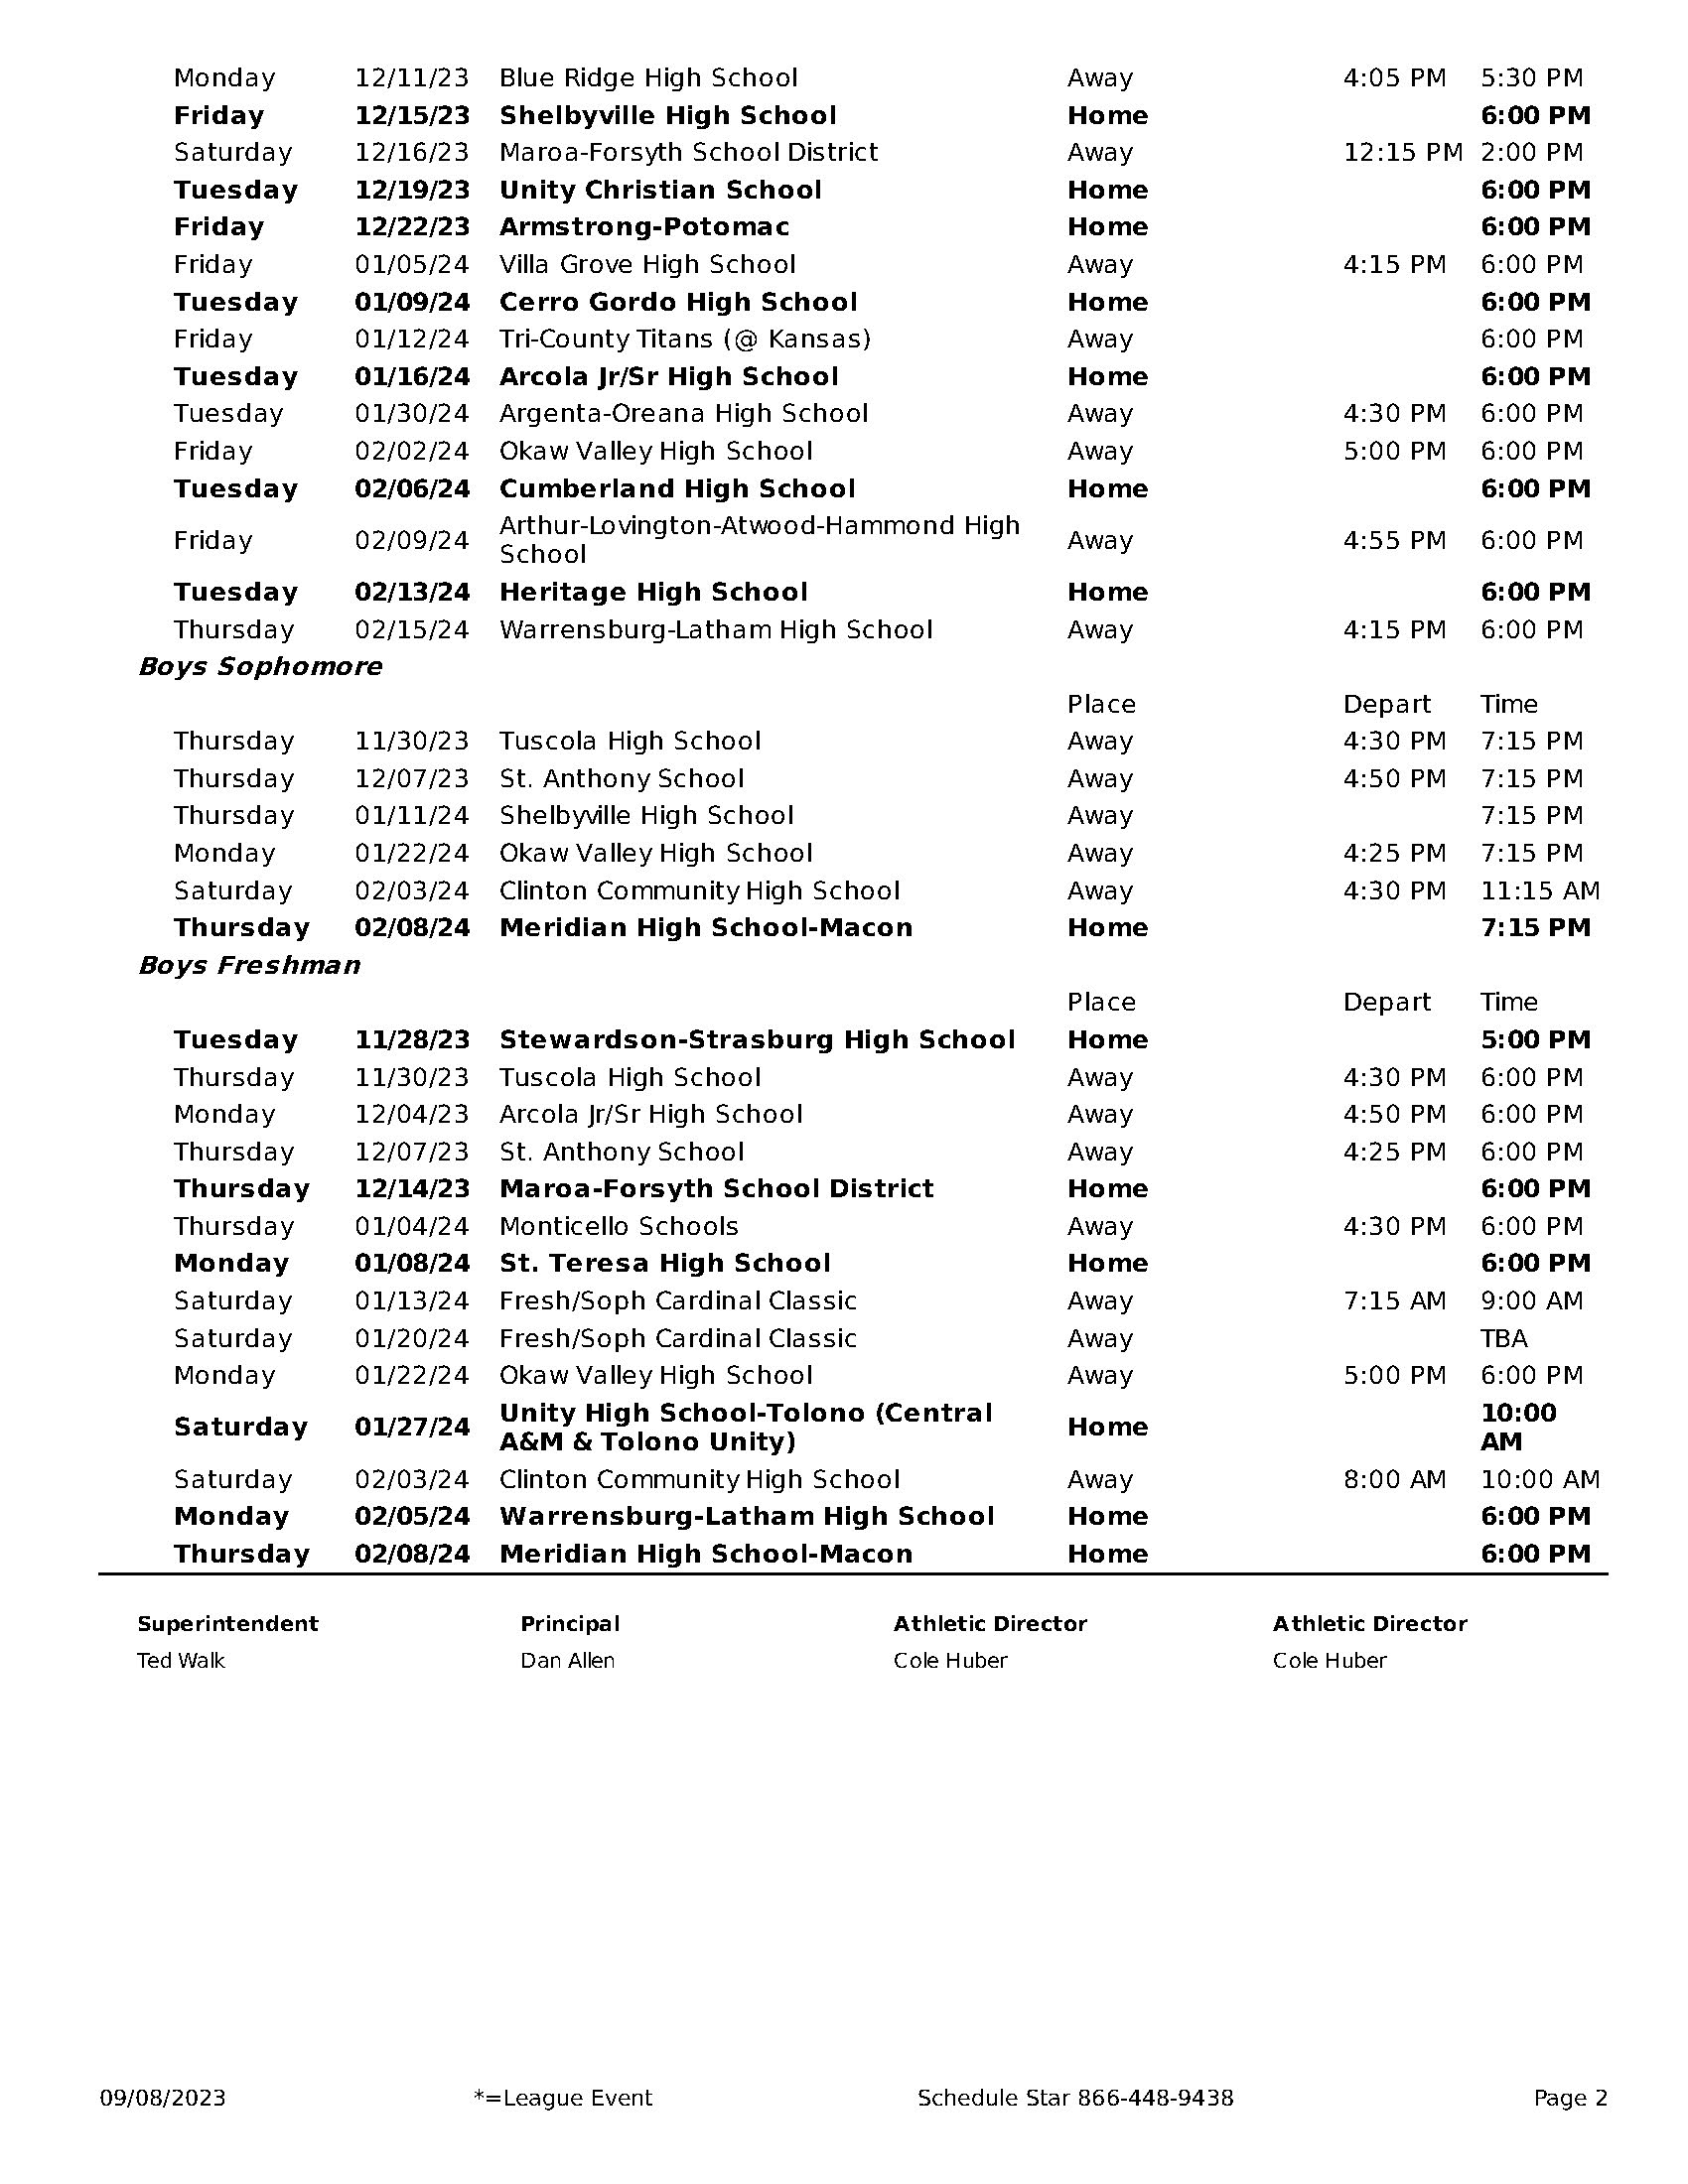 Boy's Basketball Schedule Page 2